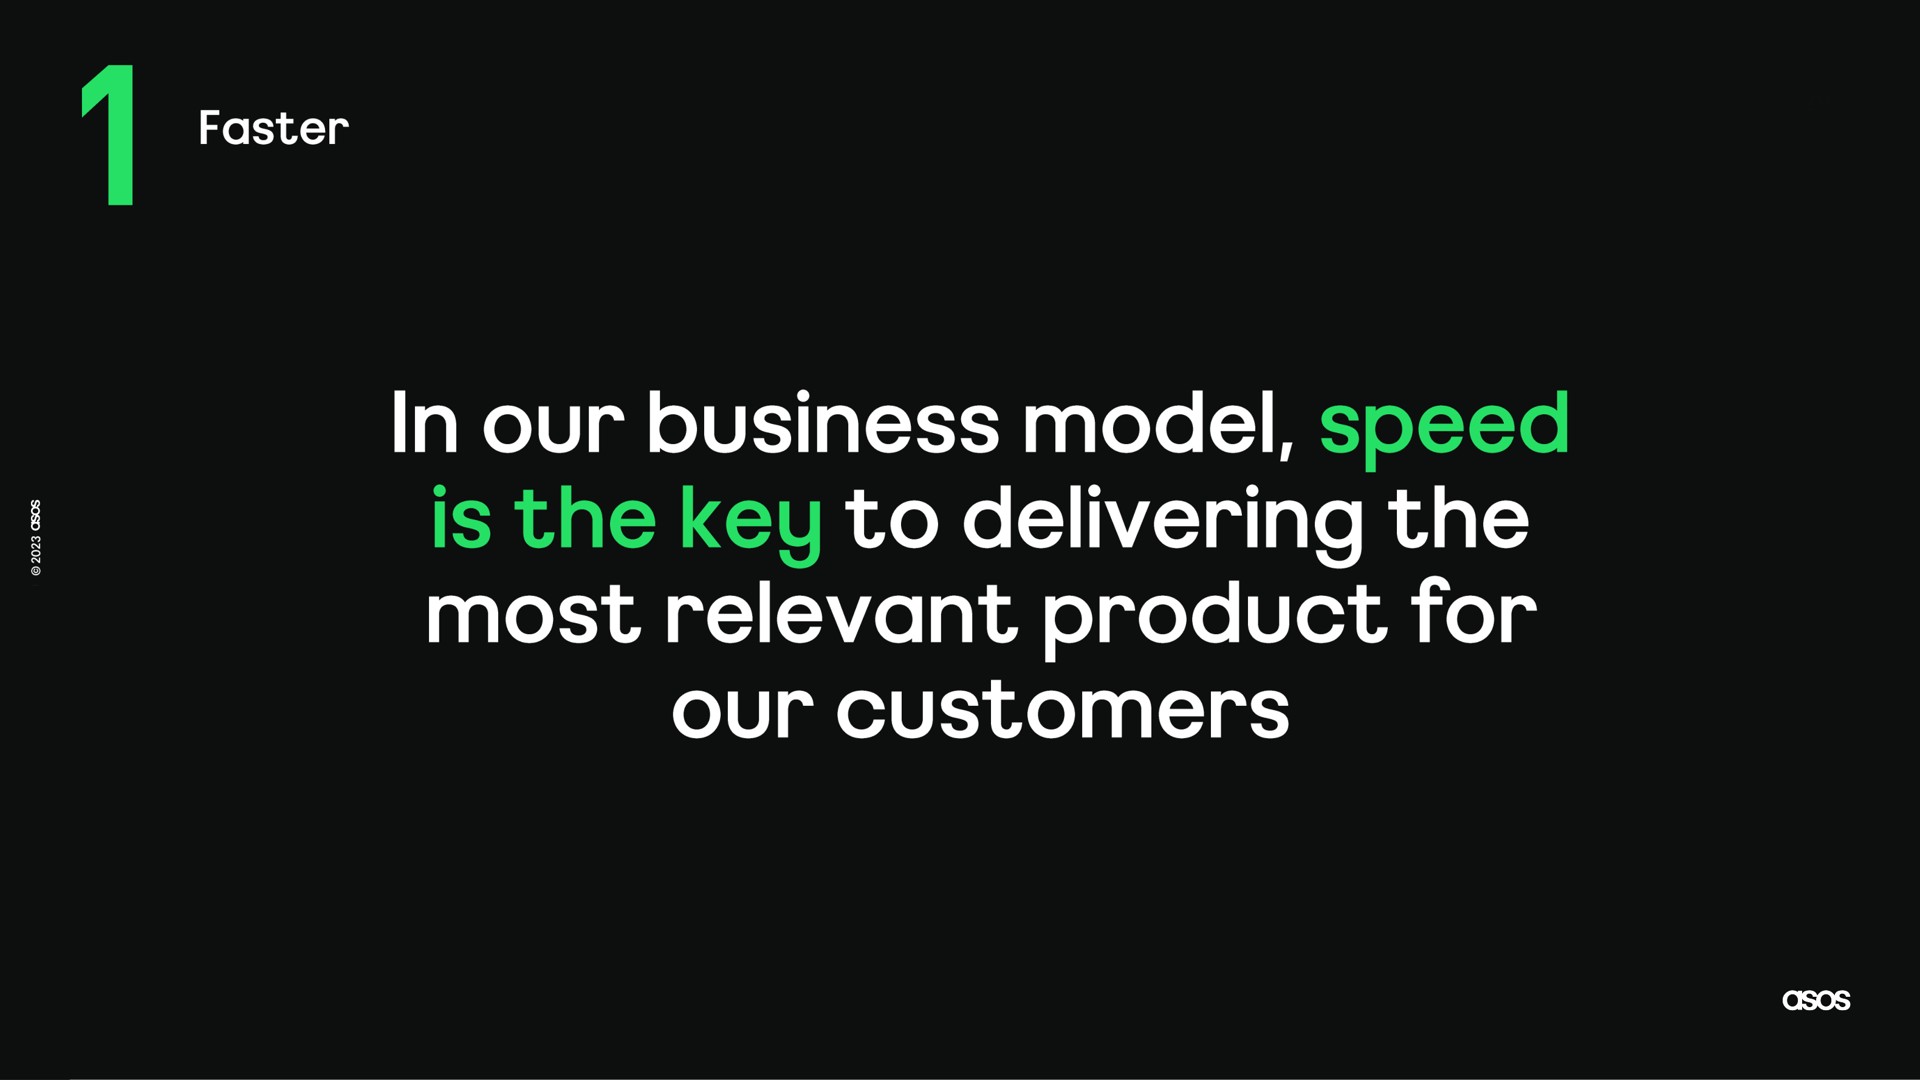 faster in our business model speed is the key to delivering the most relevant product for our customers | Asos